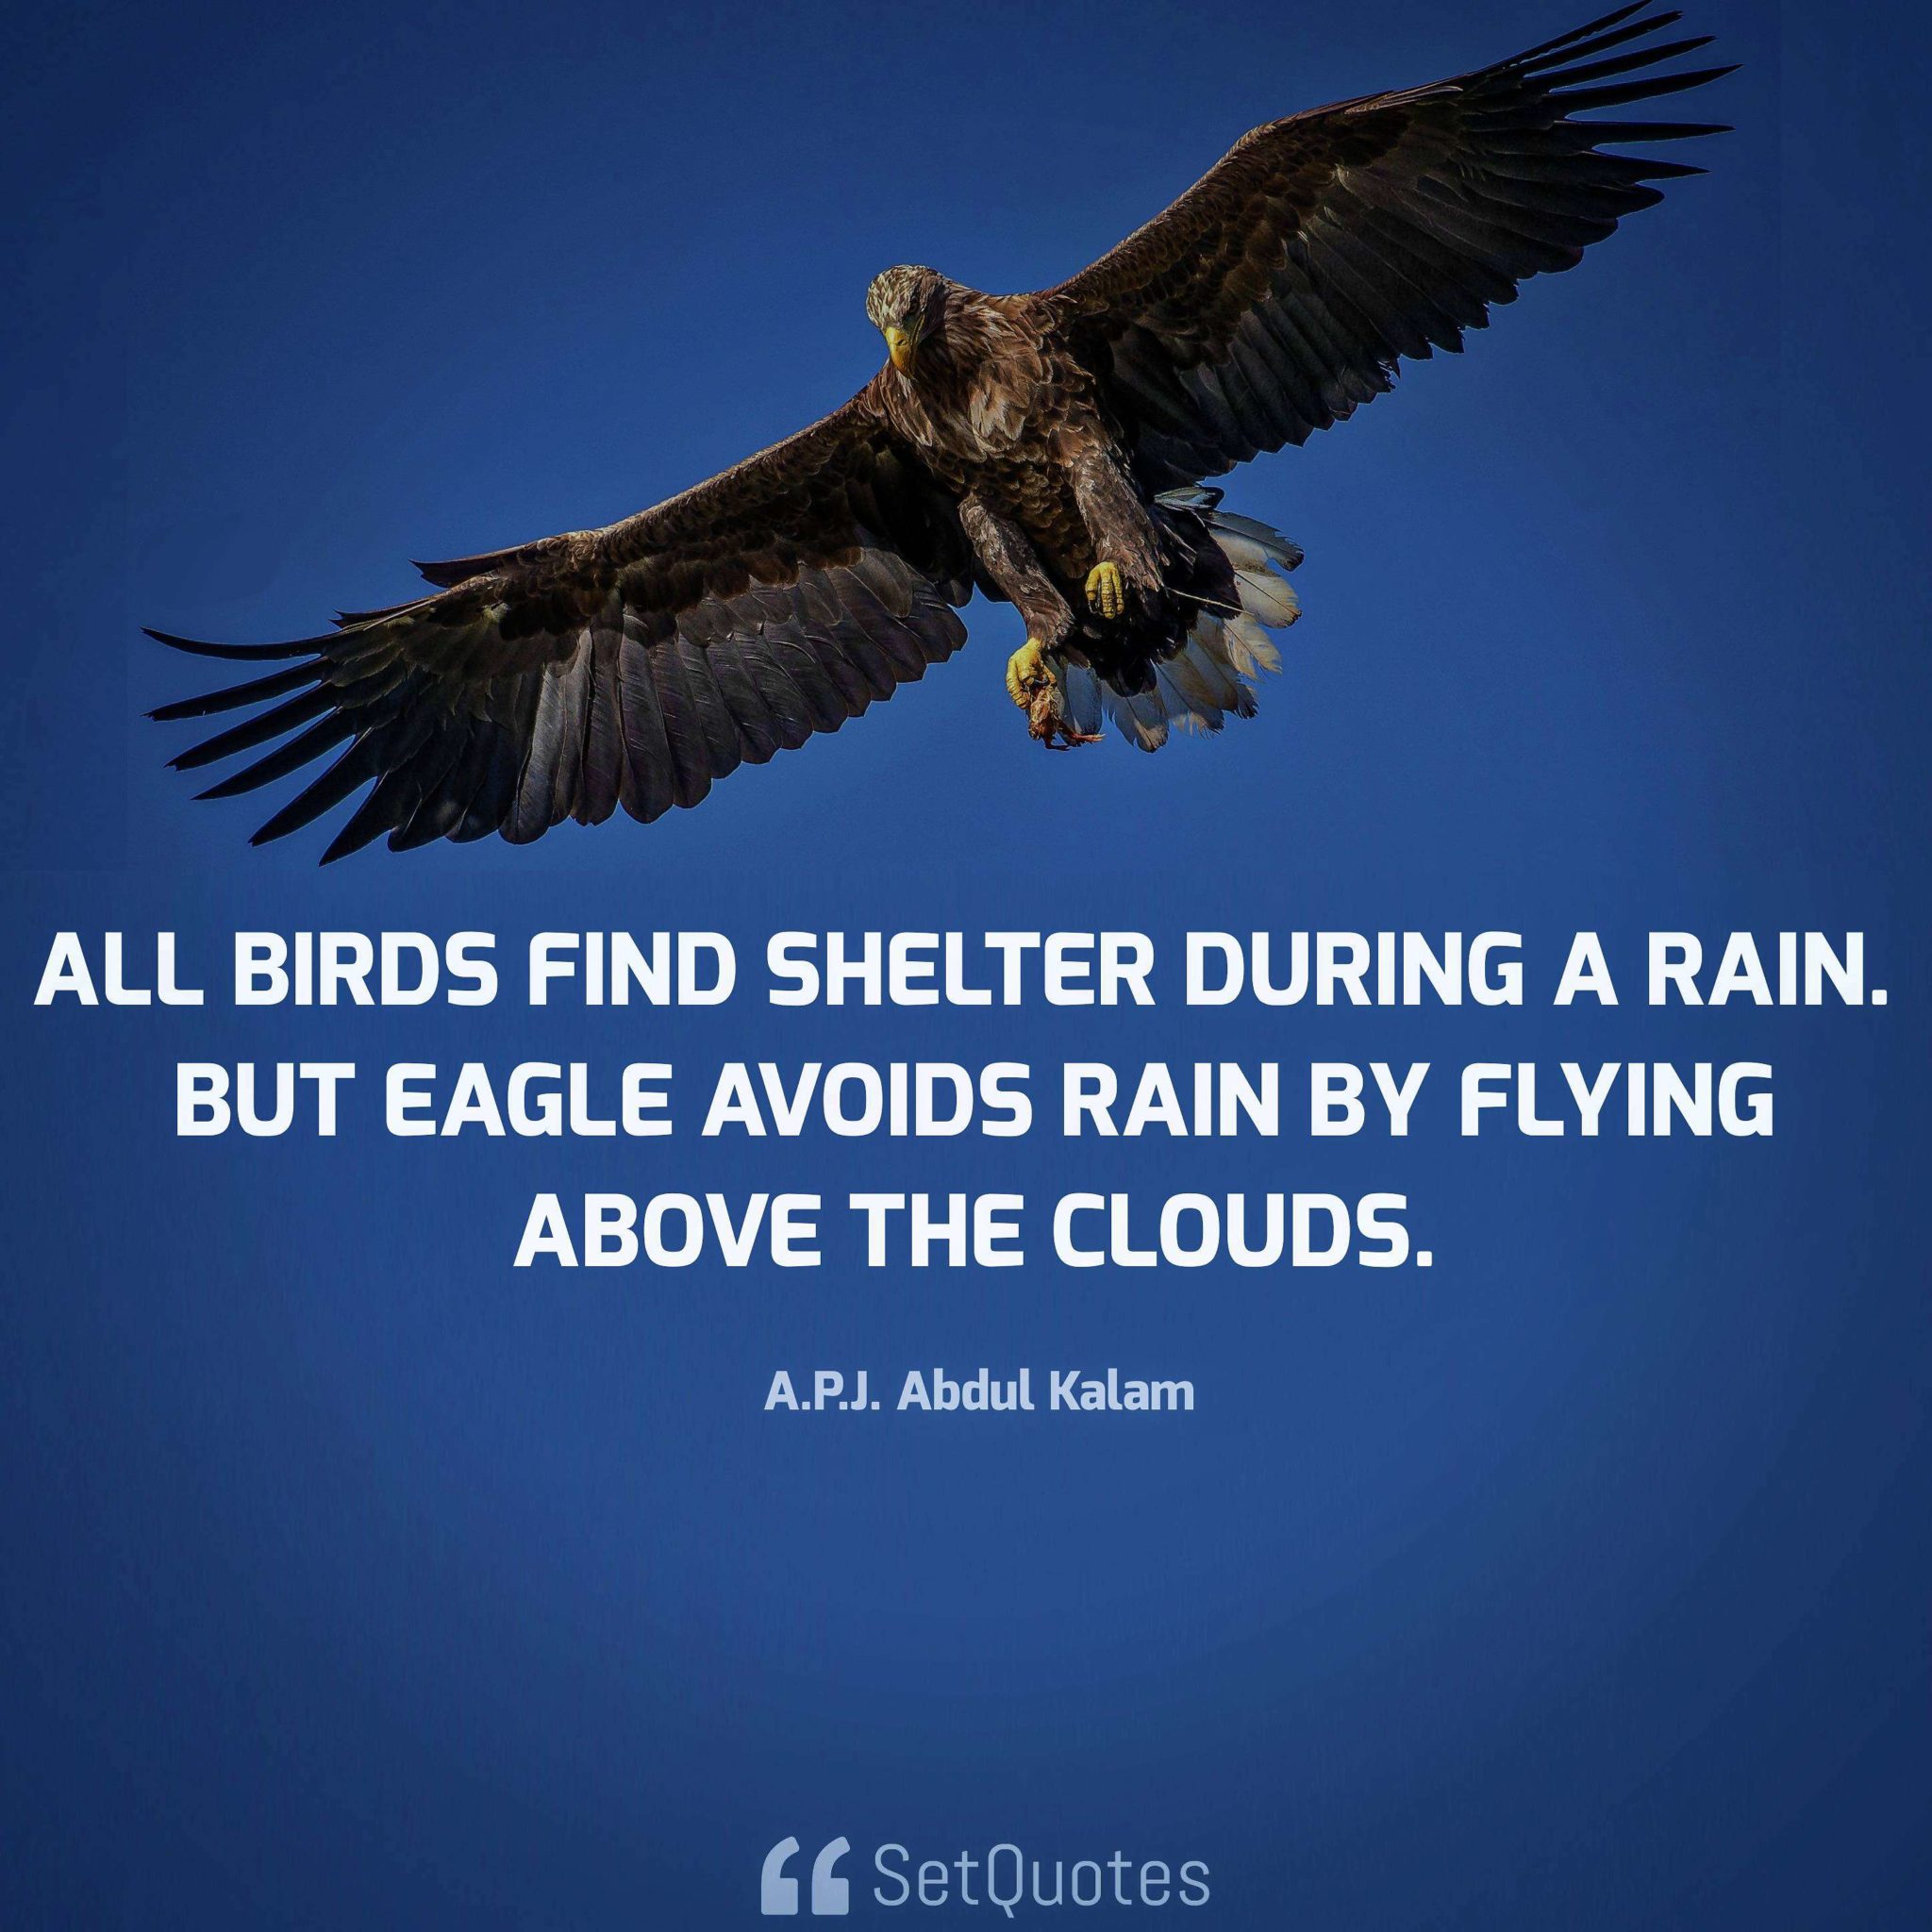 All birds find shelter during a rain 